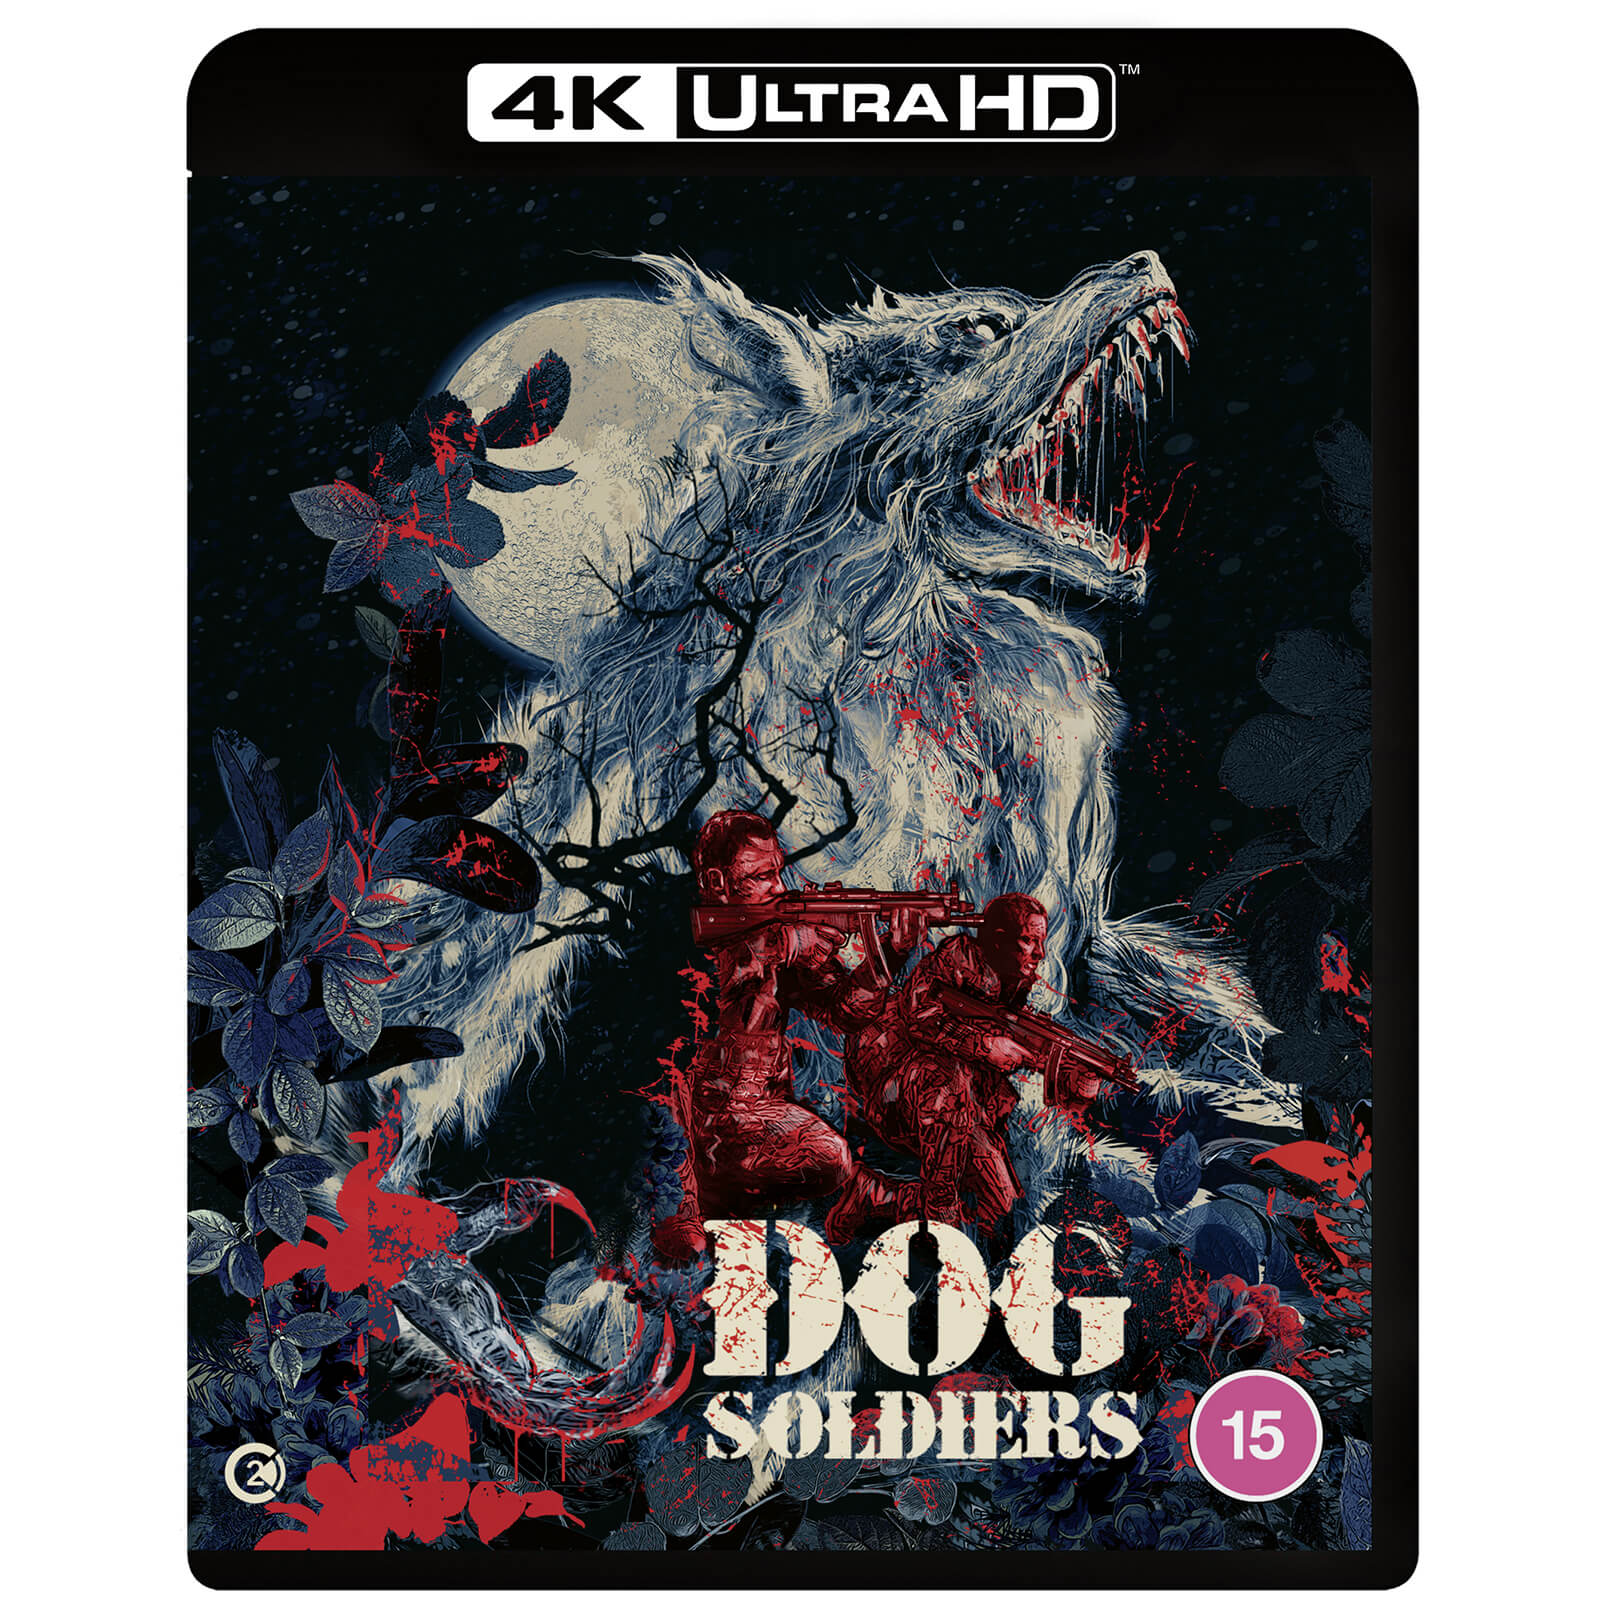 Dog Soldiers - 4K Ultra HD